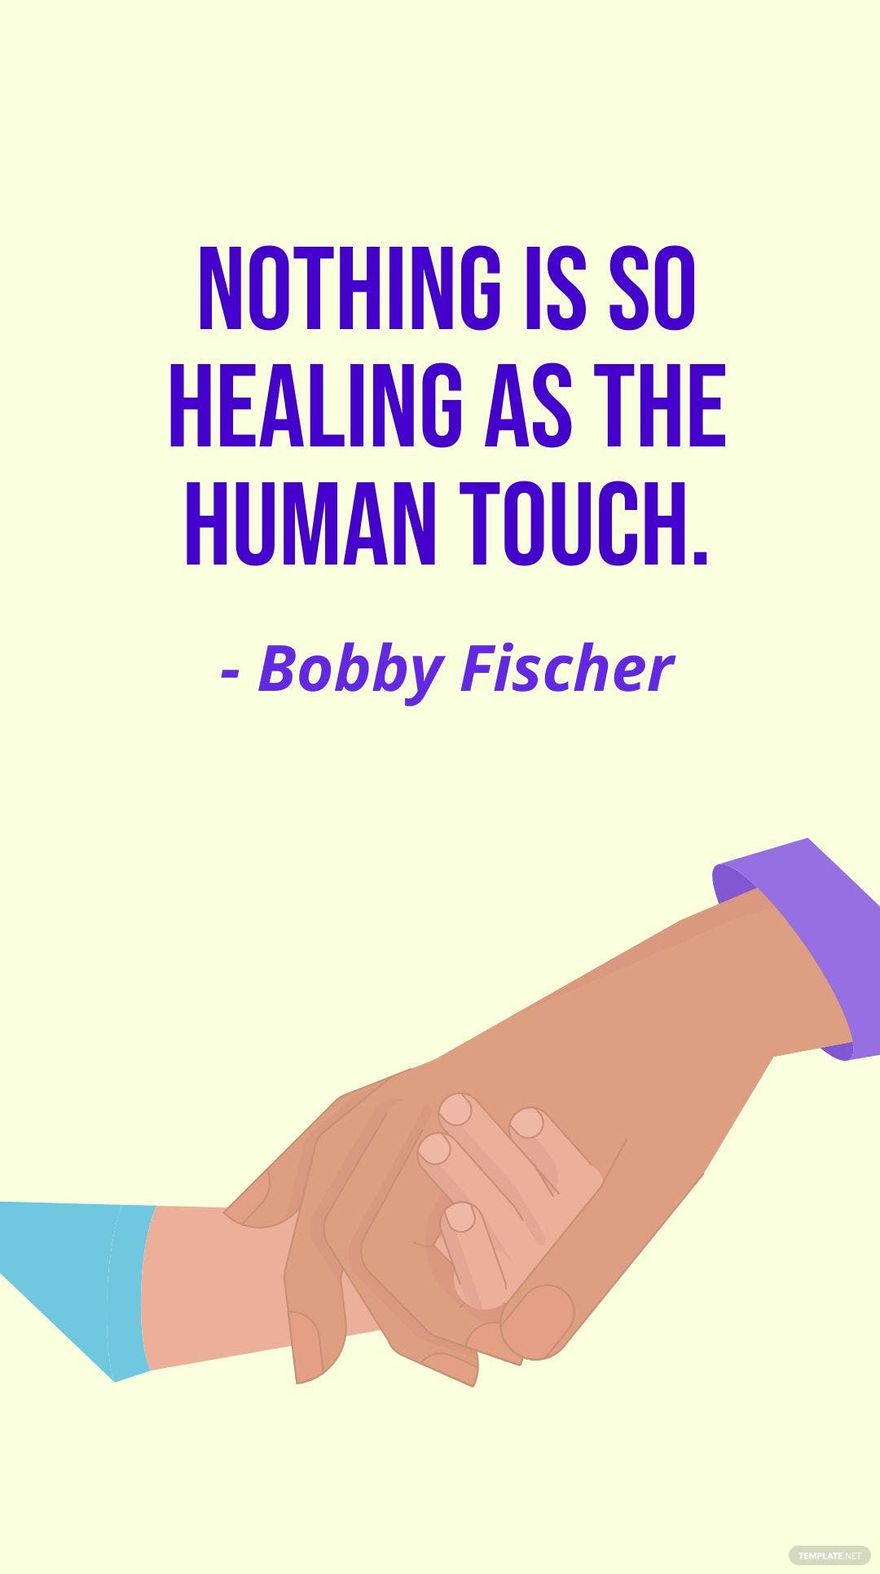 Free Bobby Fischer - Nothing is so healing as the human touch. in JPG